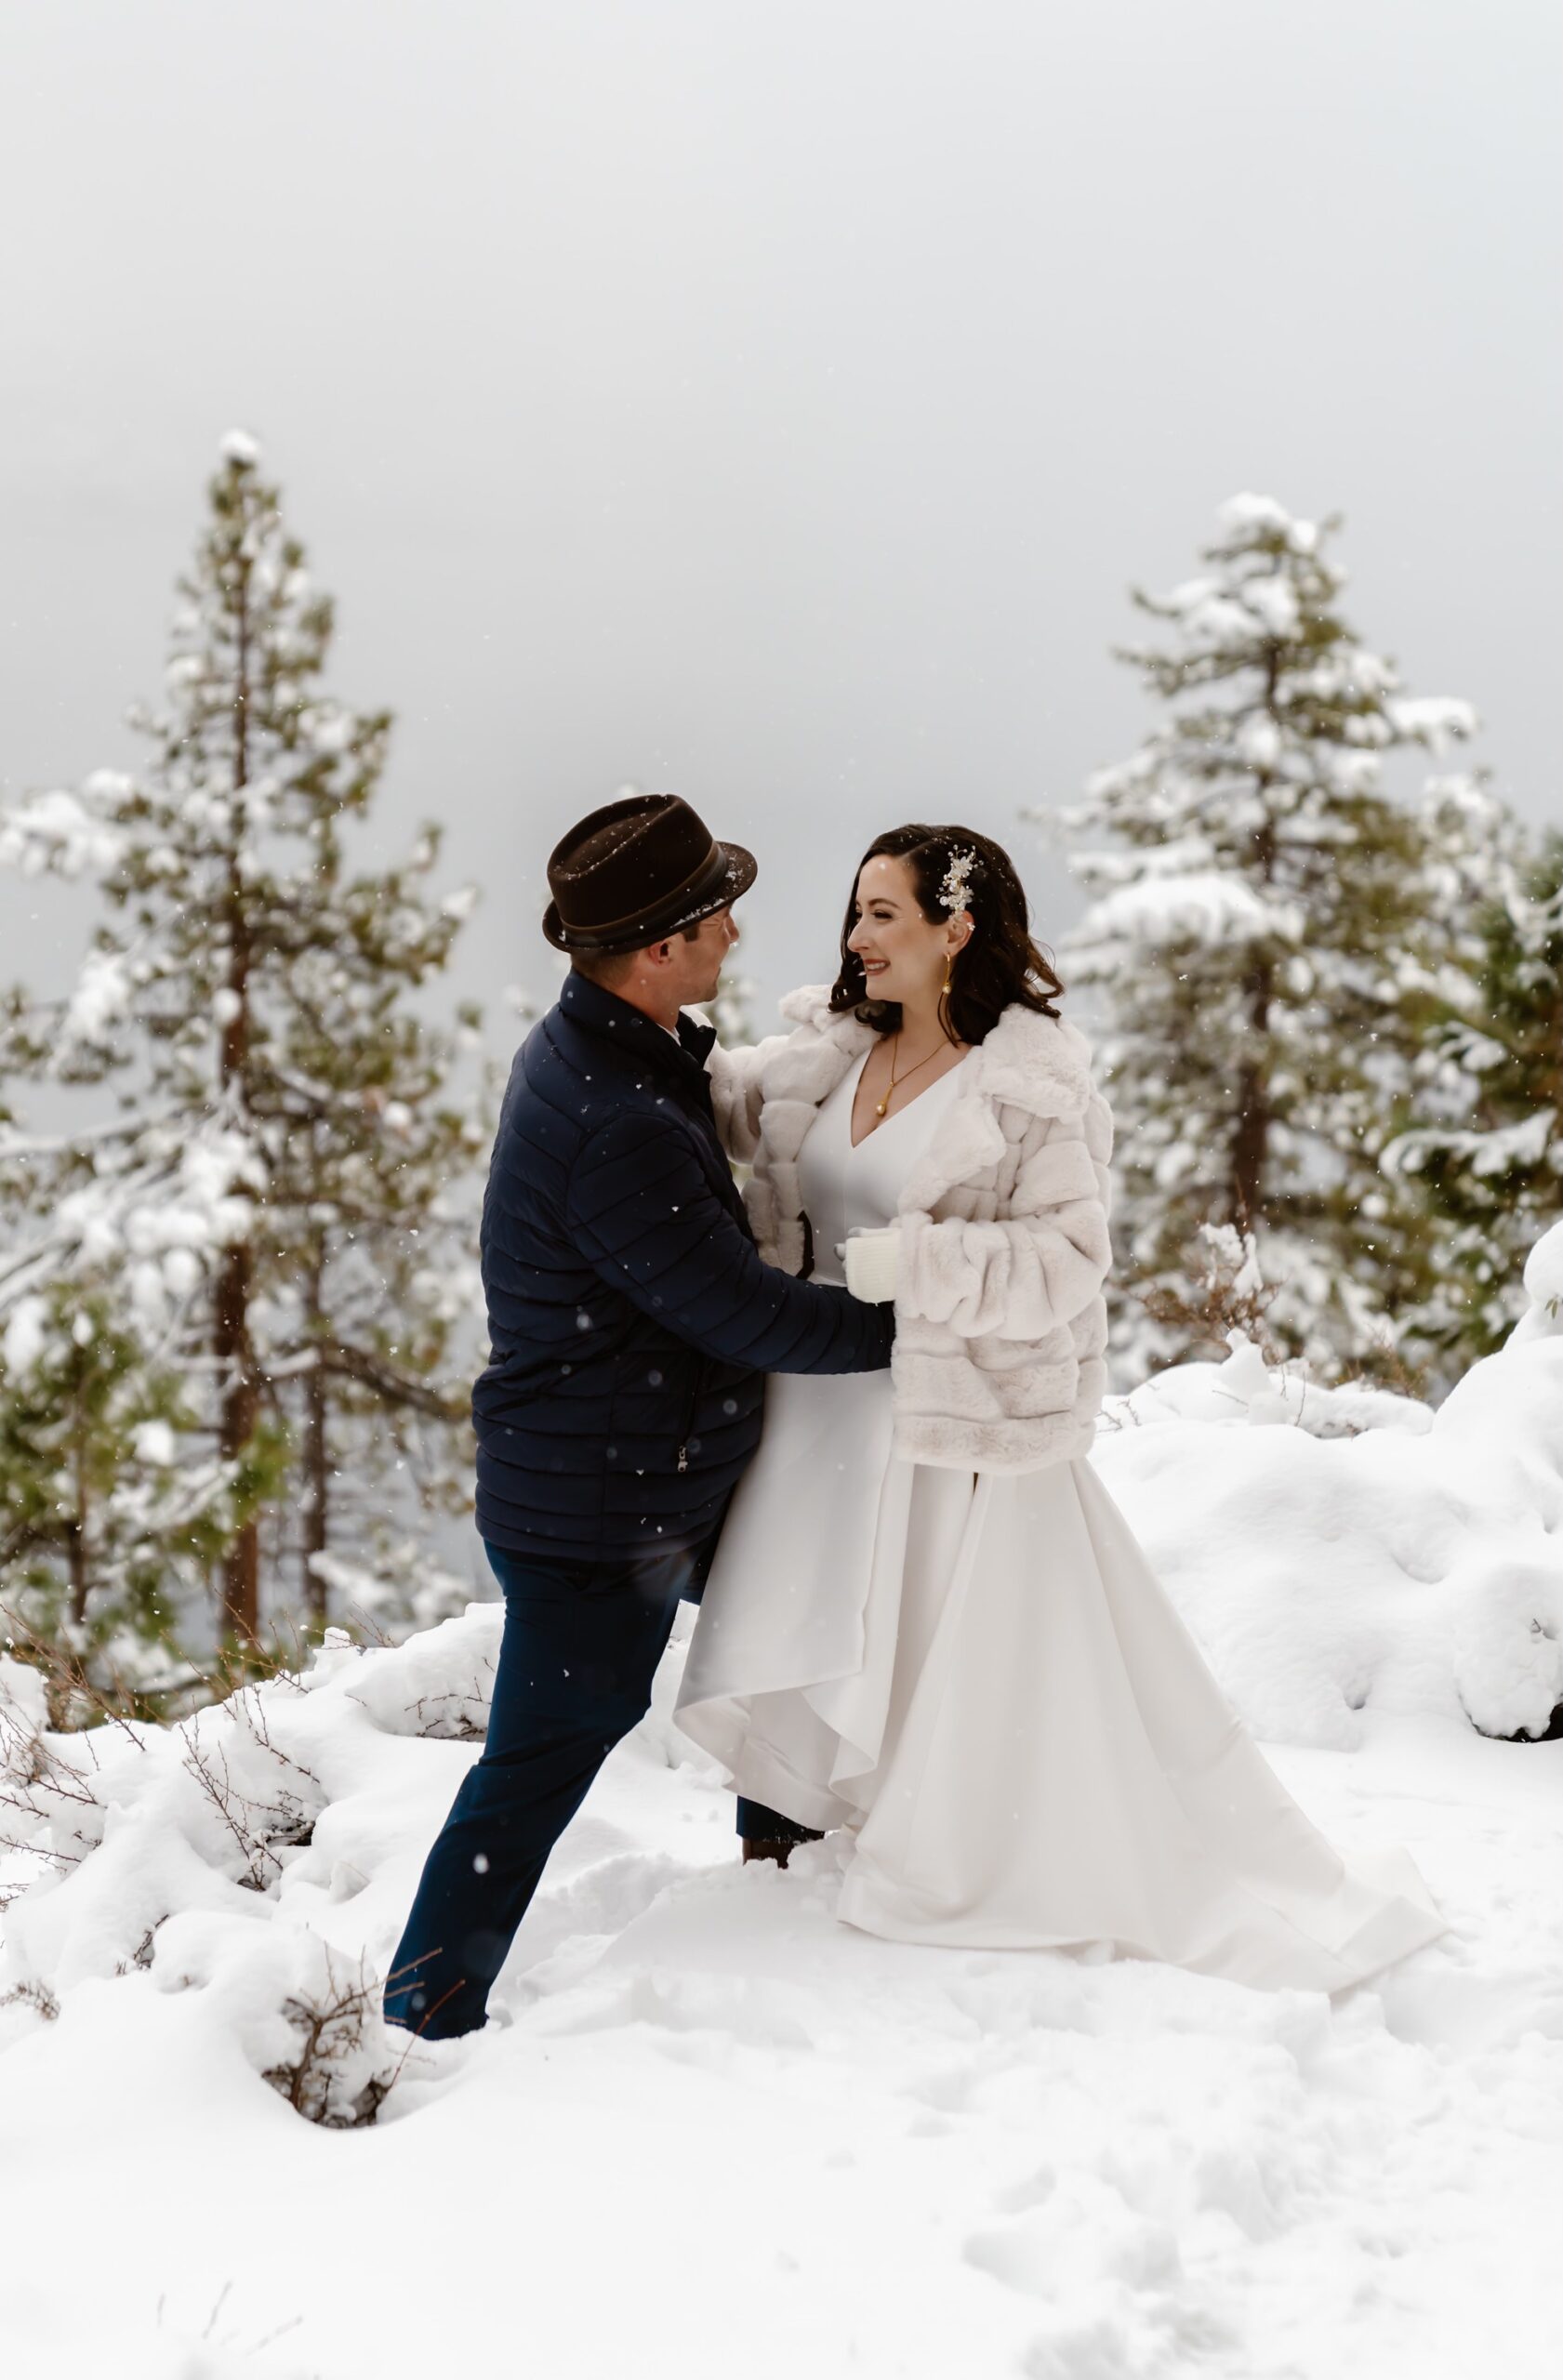 Bride and groom embrace in the snowy mountains